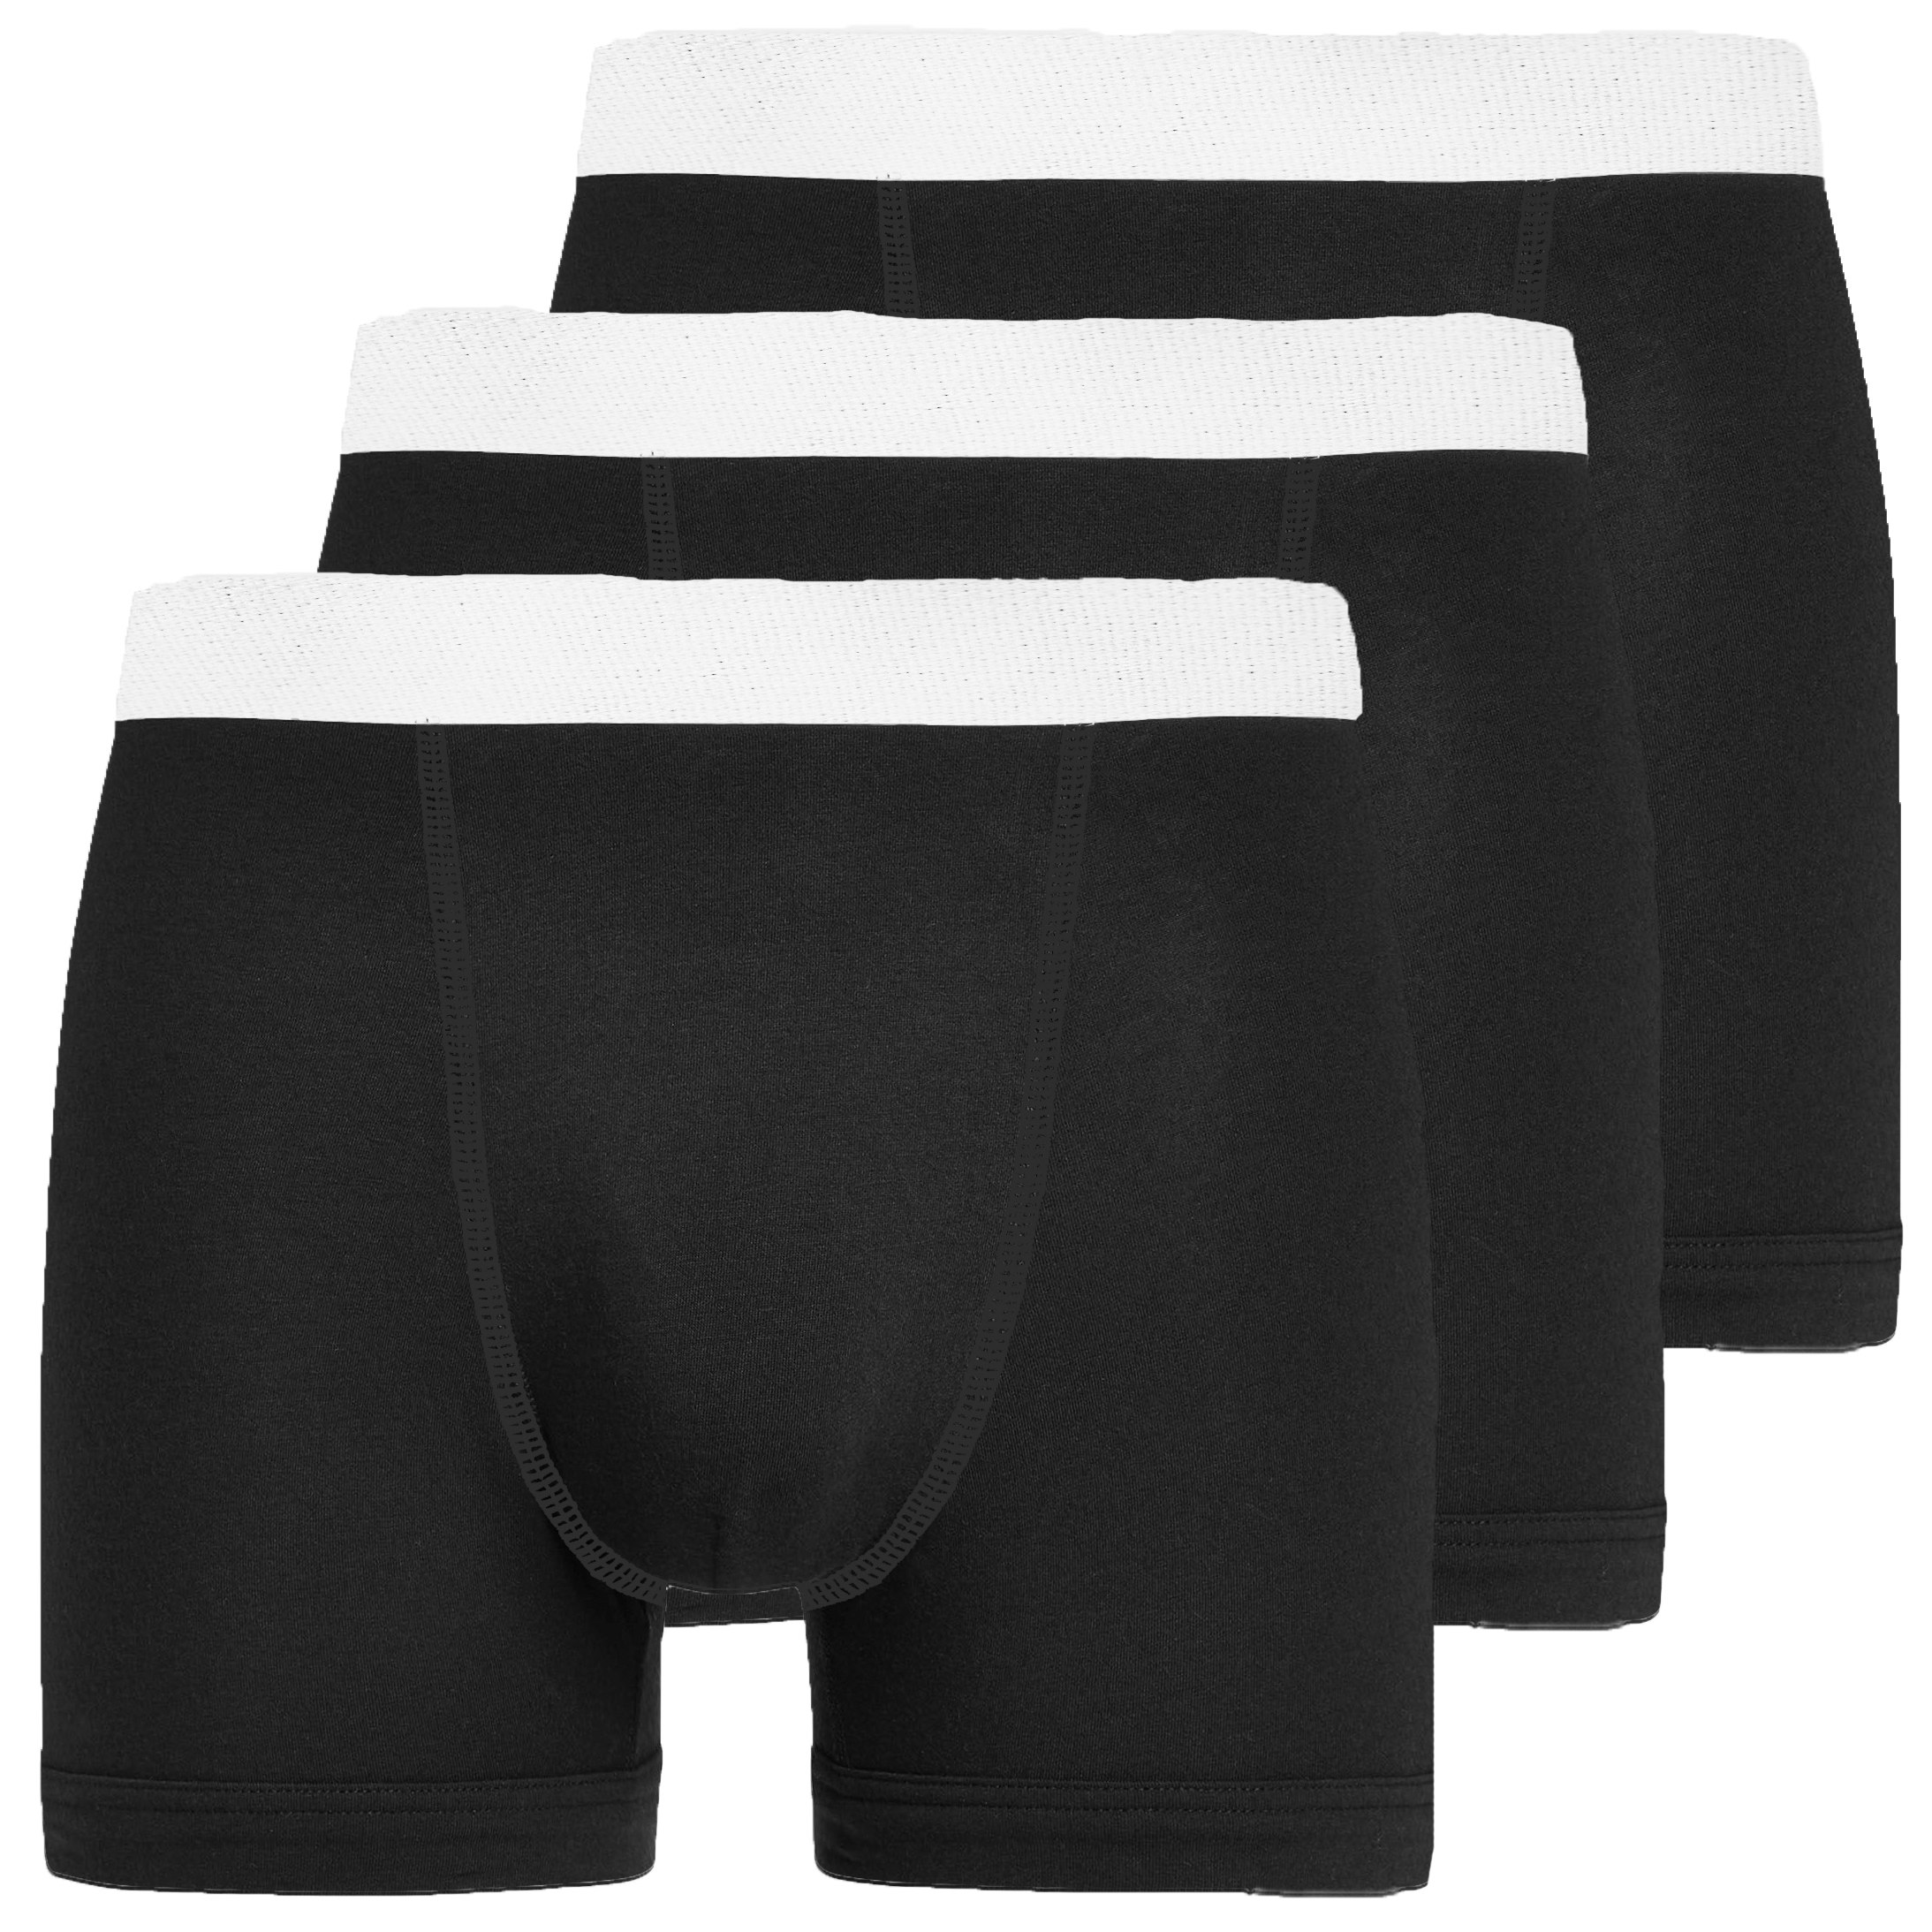 King Sizes Big Mens Boxer Shorts Underpants Sizes 2XL to 8XL 3 in a pack a pack